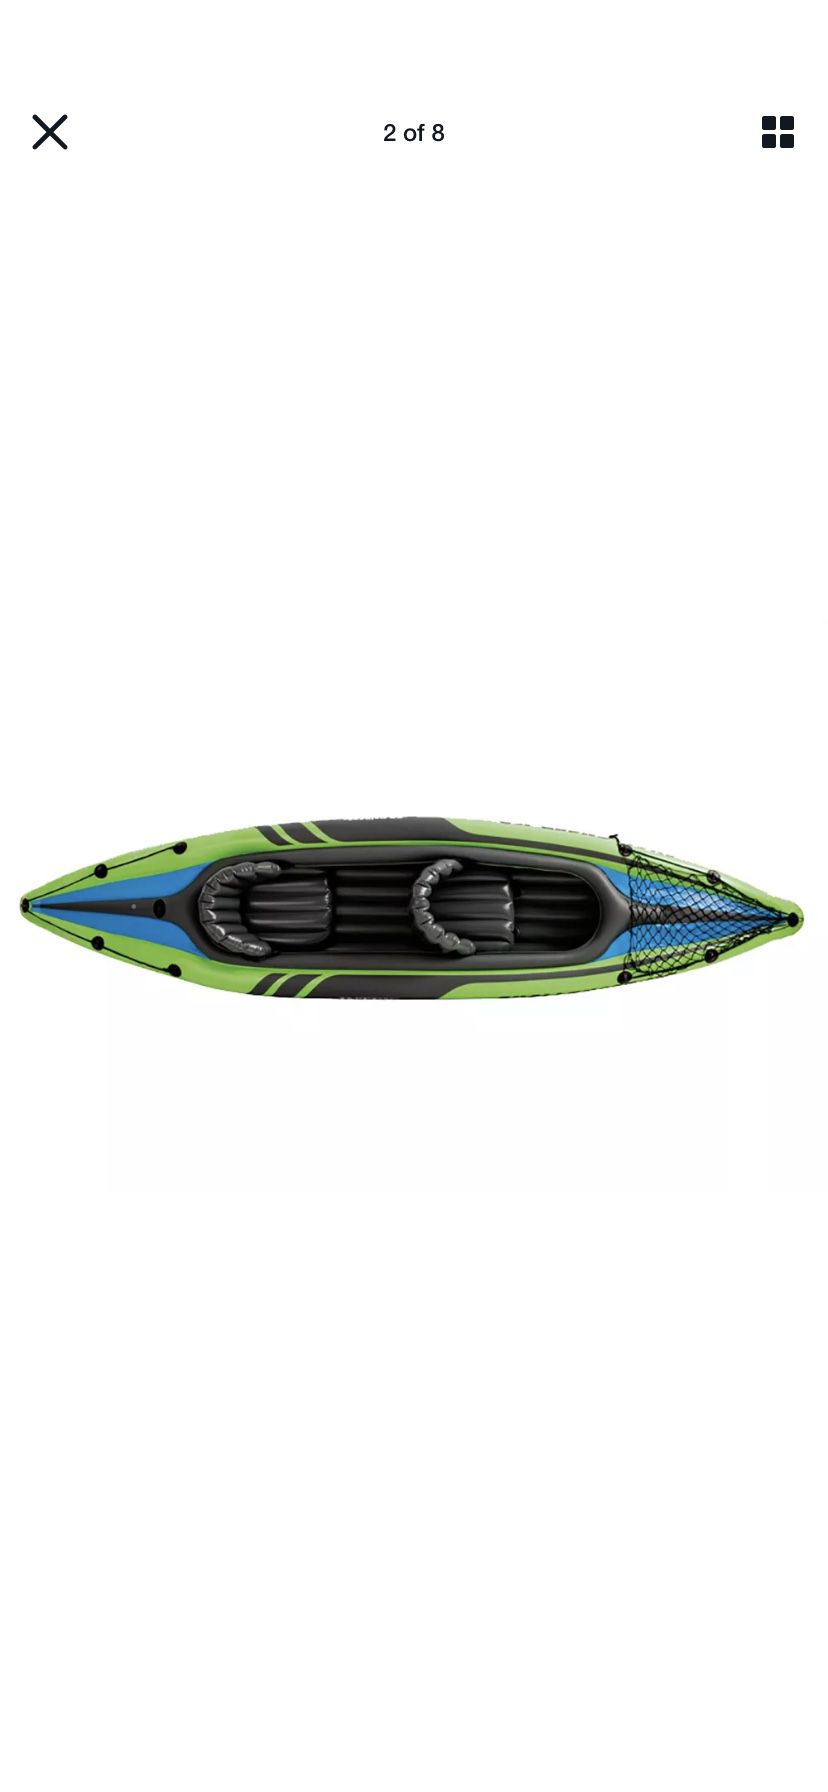 Intex Challenger K2 Kayak, 2-Person Inflatable Kayak Set with Oars and Pump